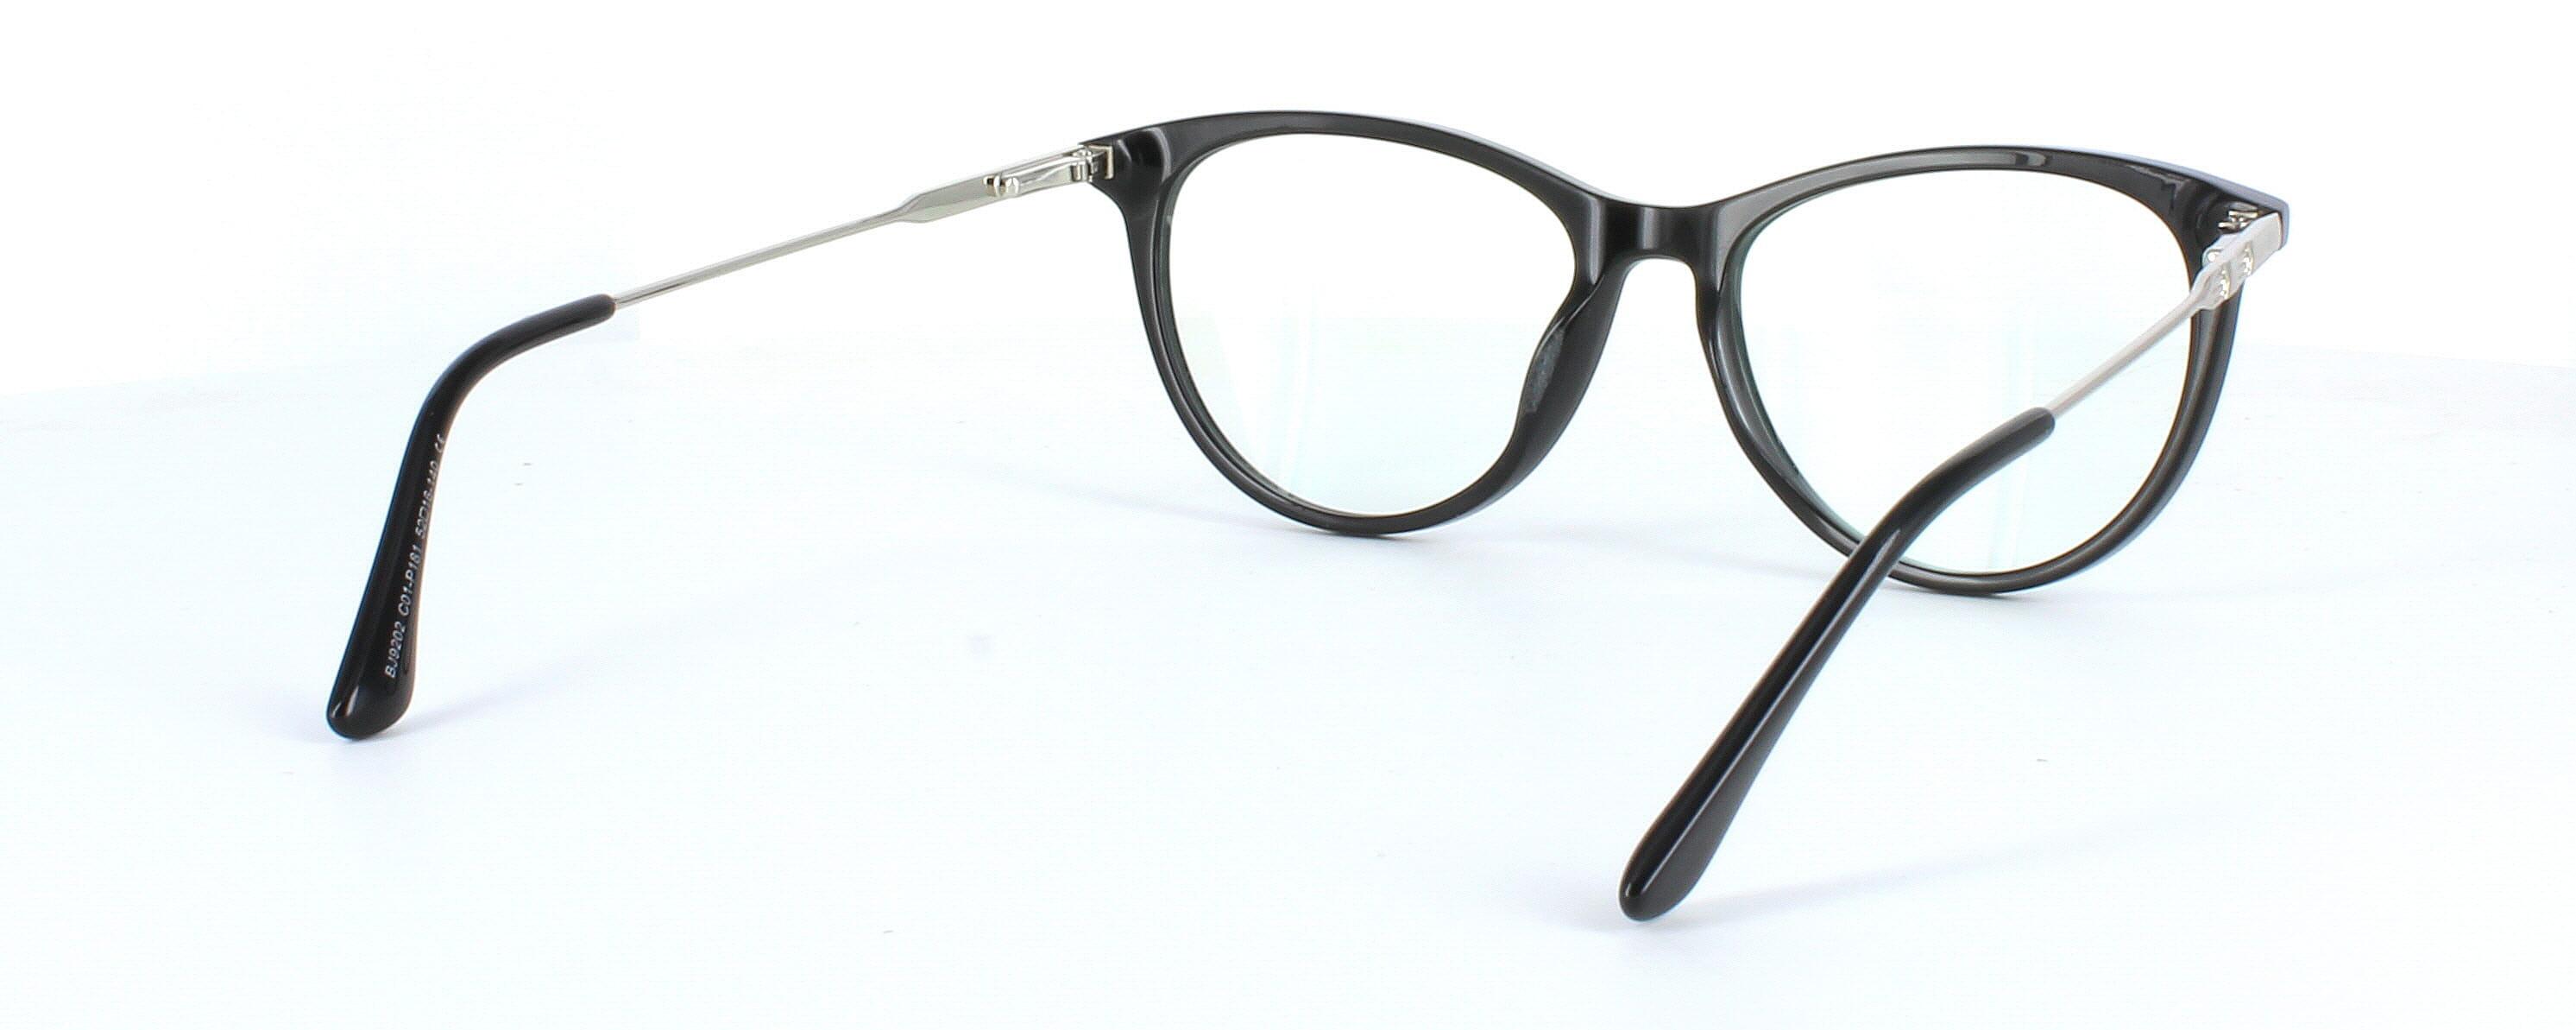 Edward Scotts BJ9202 C1 - Women's oval shaped shiny black acetate glasses with gold metal spring hinged arms - image view 5